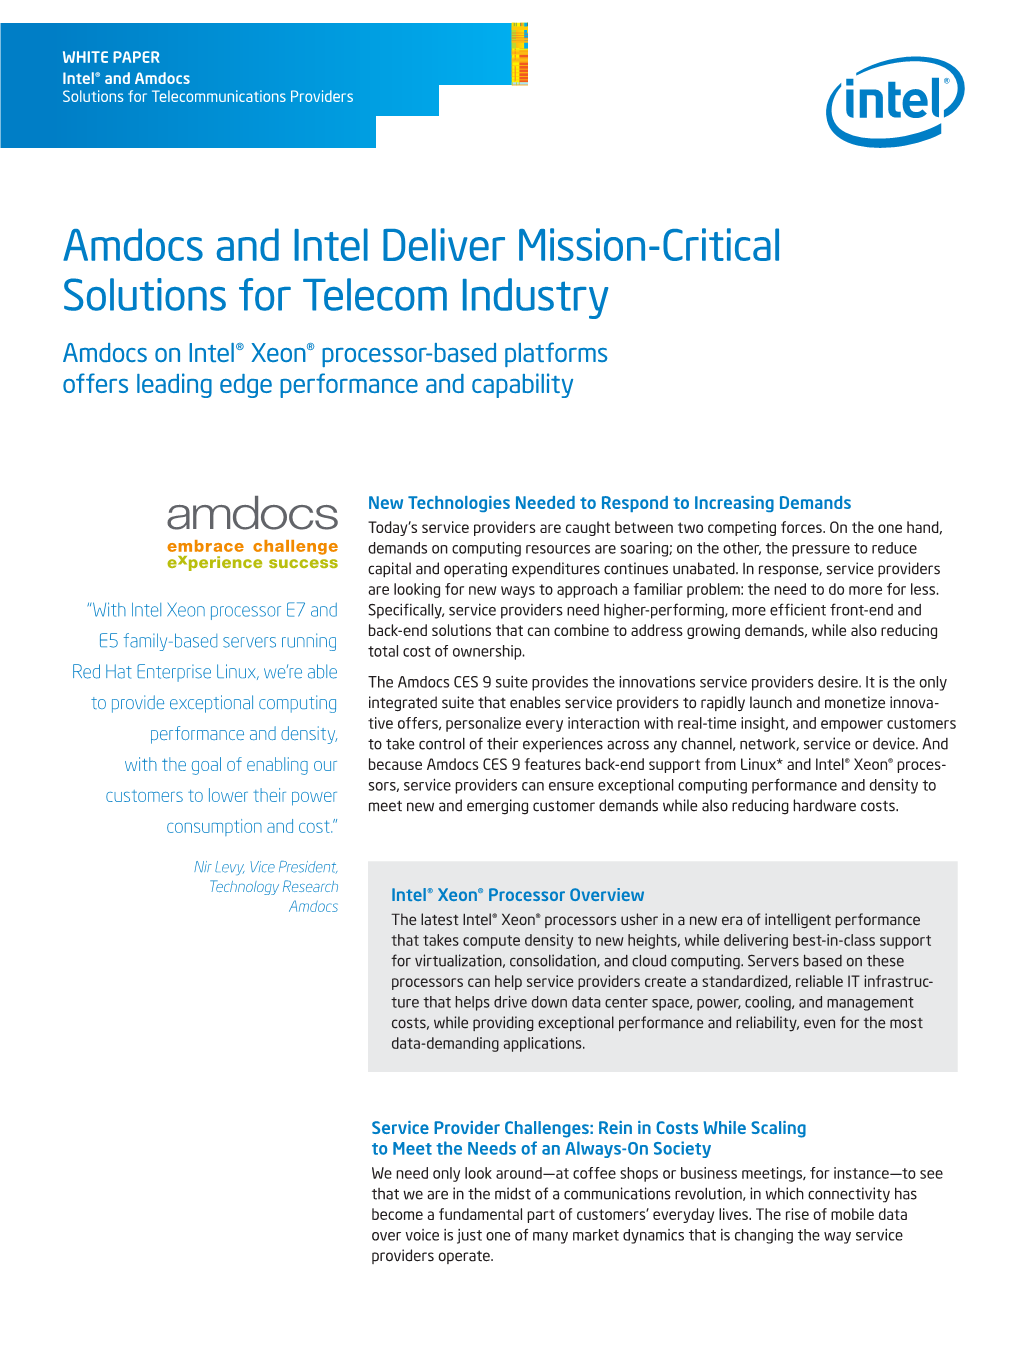 Amdocs and Intel Deliver Mission-Critical Solutions For